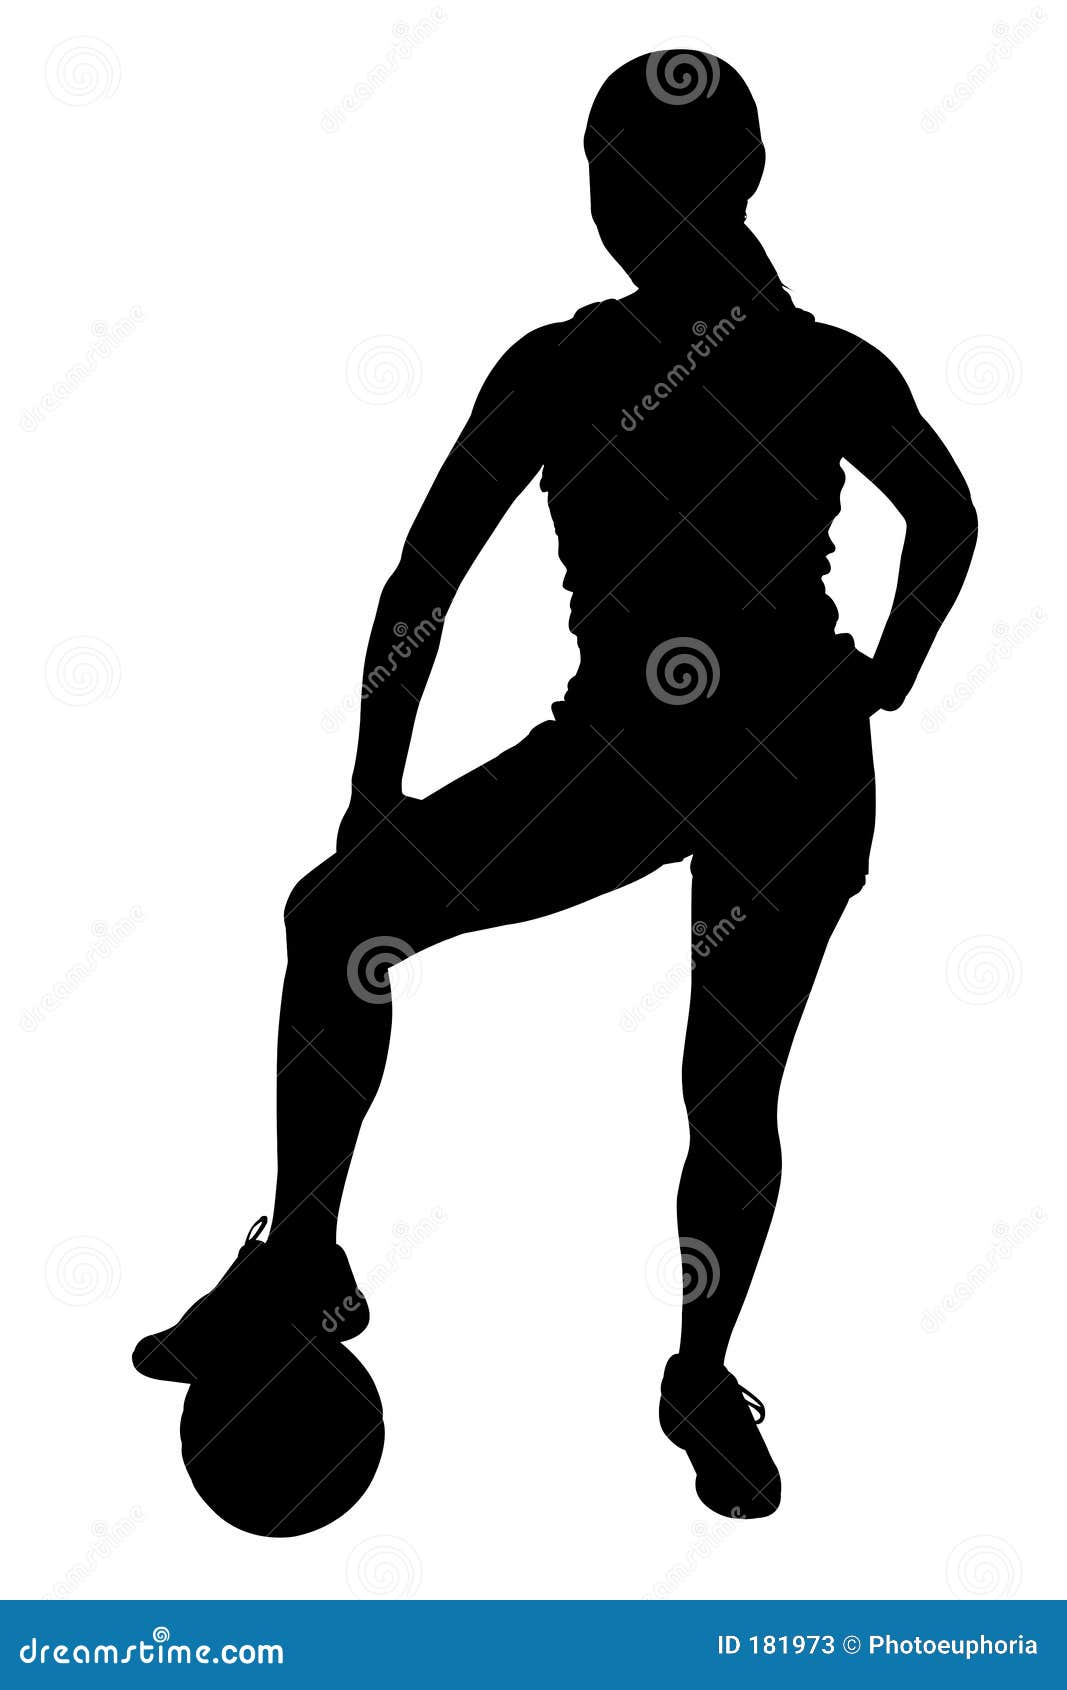 Silhouette With Clipping Path Of Woman With Foot On Basketball Stock